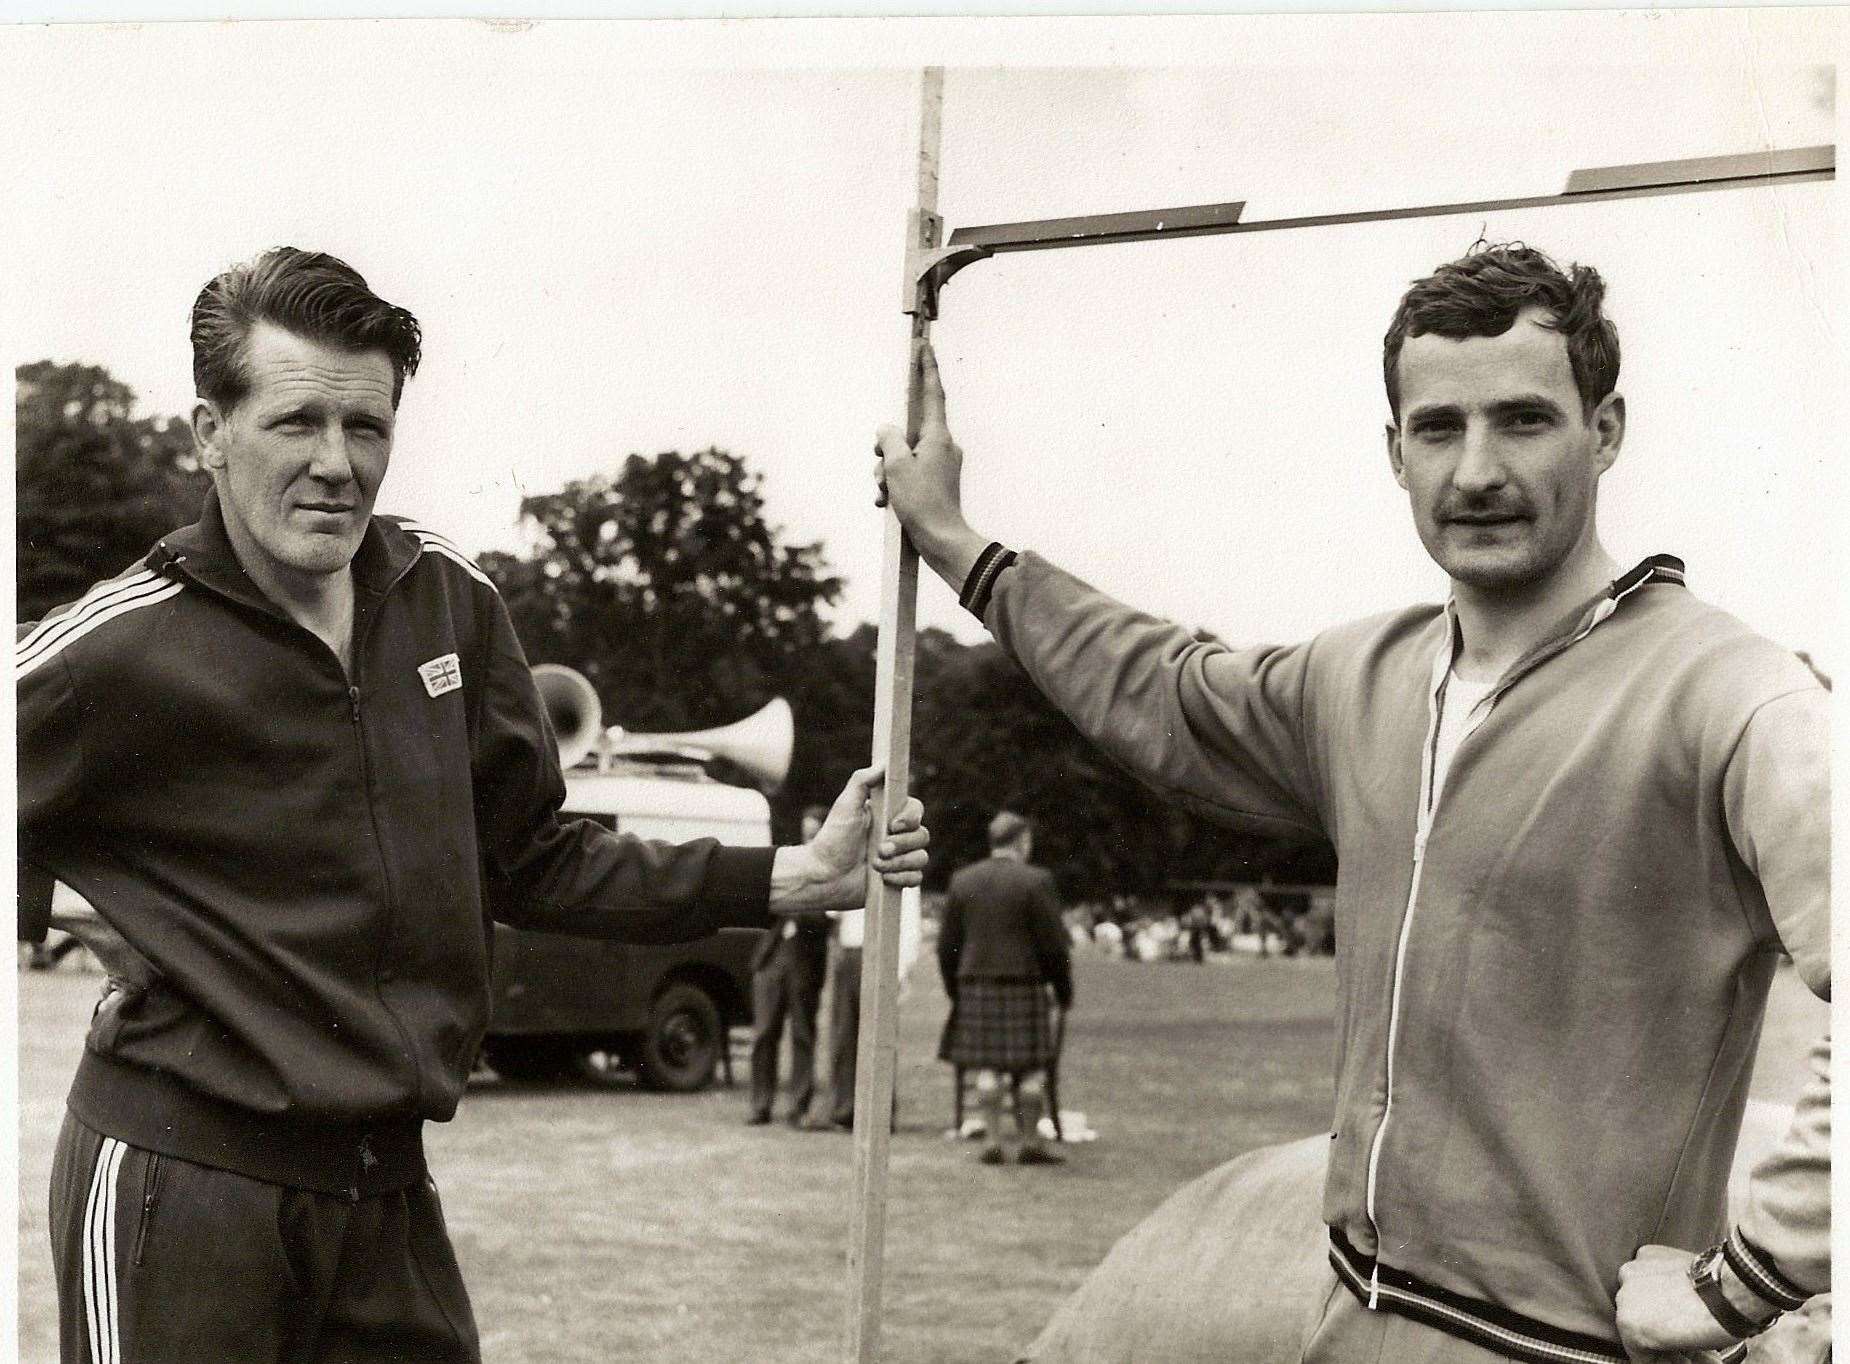 John (right) competed for several years in the high jump at Forres Highland Games. He is pictured with champion Crawford Fairbrother in 1972.